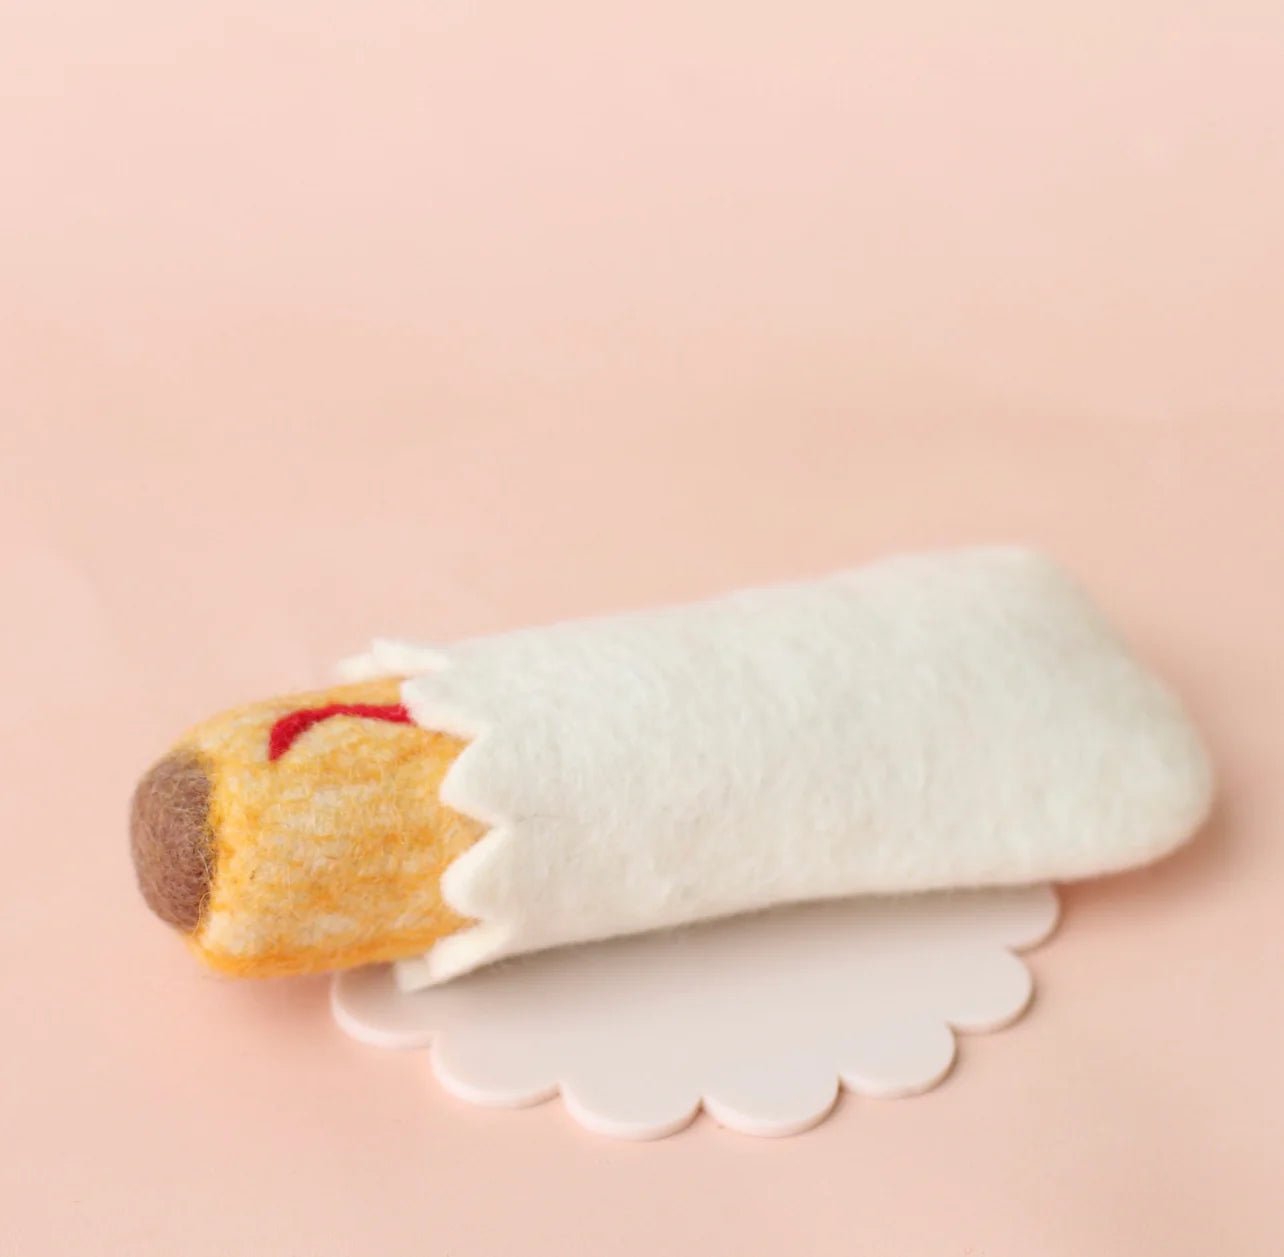 JUNI MOON | SAUSAGE ROLL IN BAG by JUNI MOON - The Playful Collective